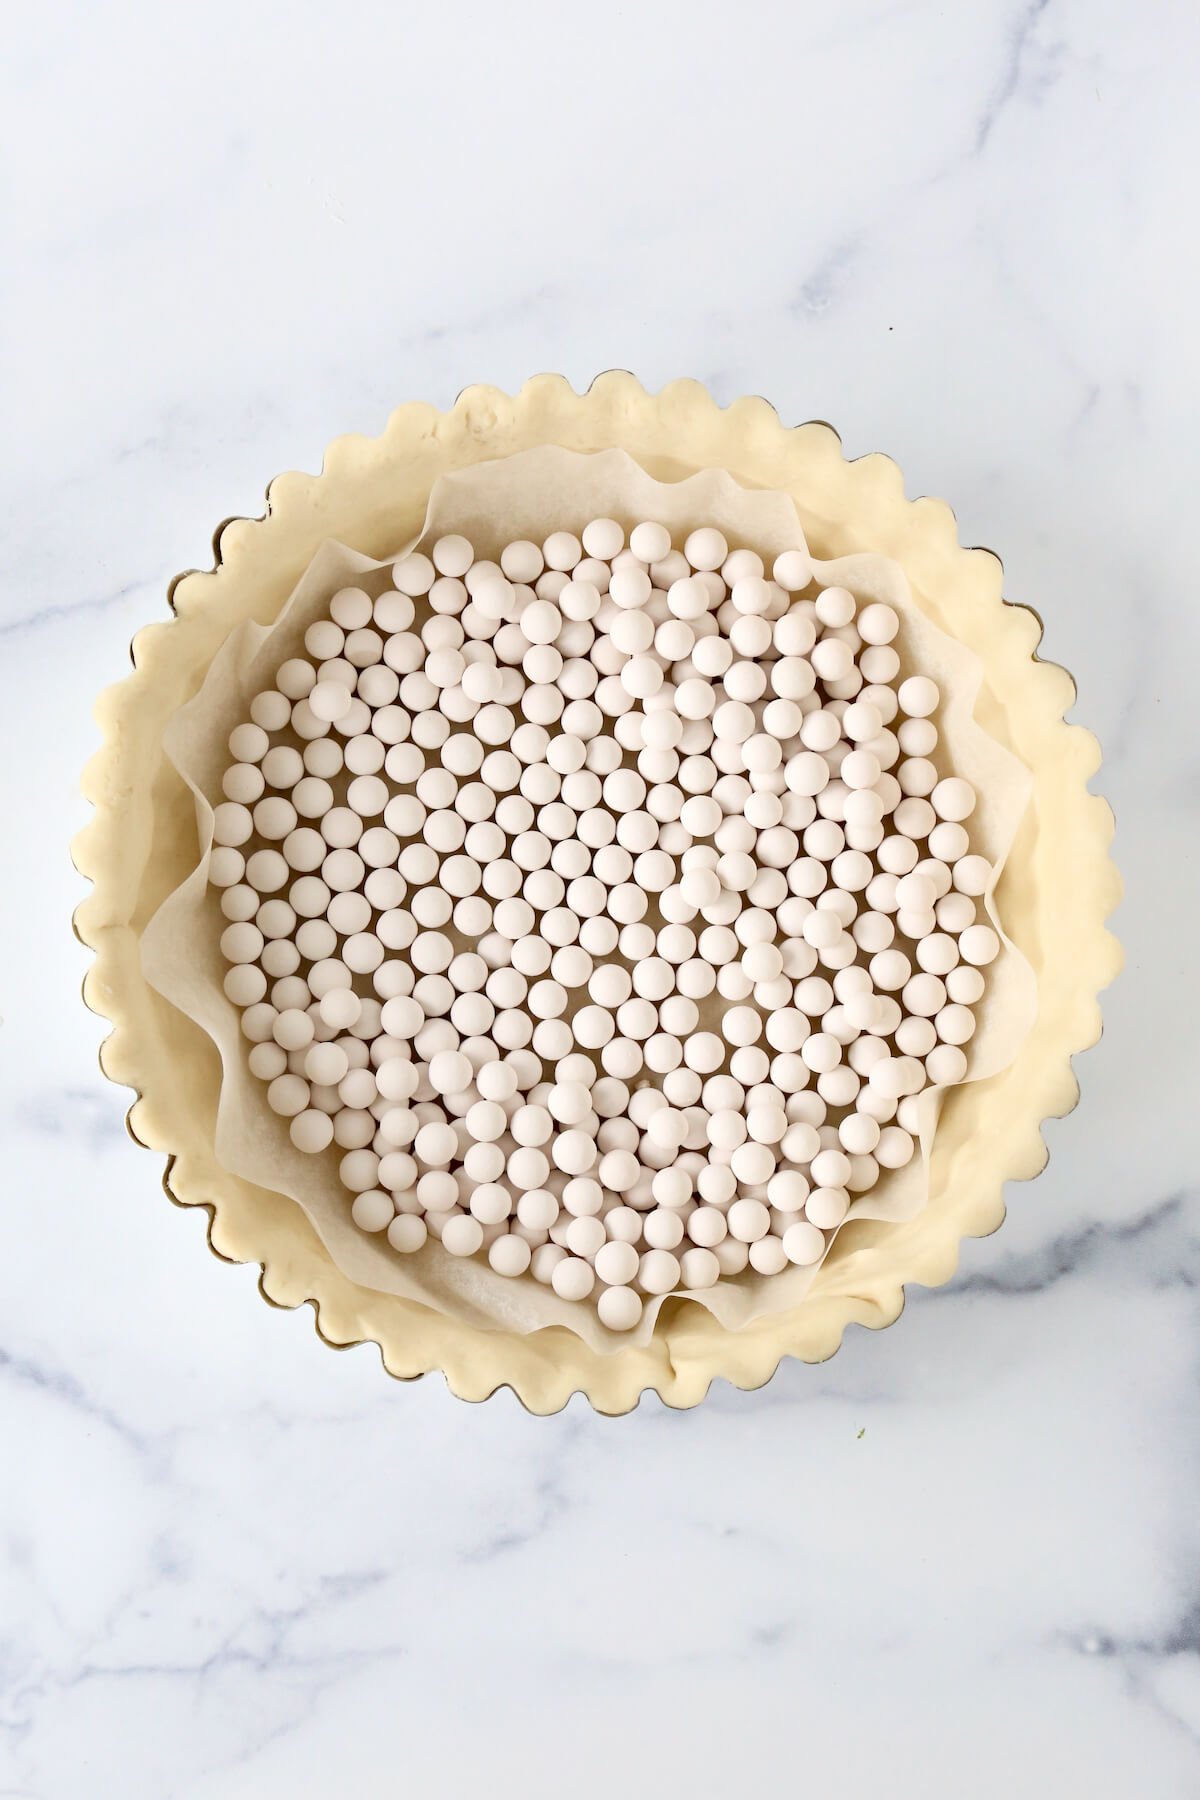 Pie dough in a deep dish tart pan filled with pie weights.